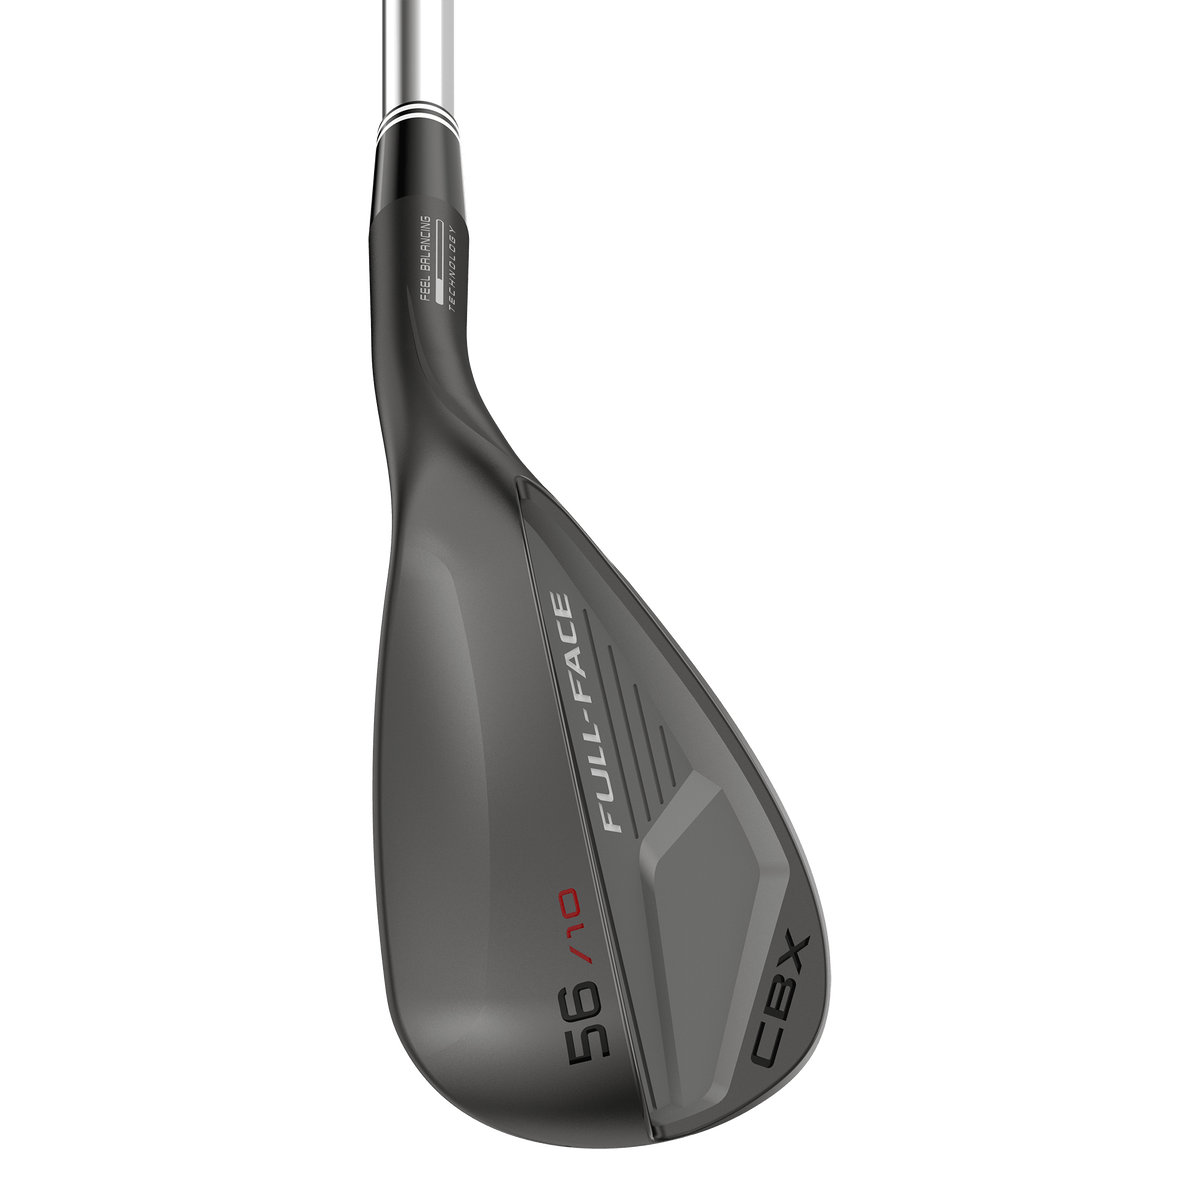 Cleveland CBX Full-Face Wedge